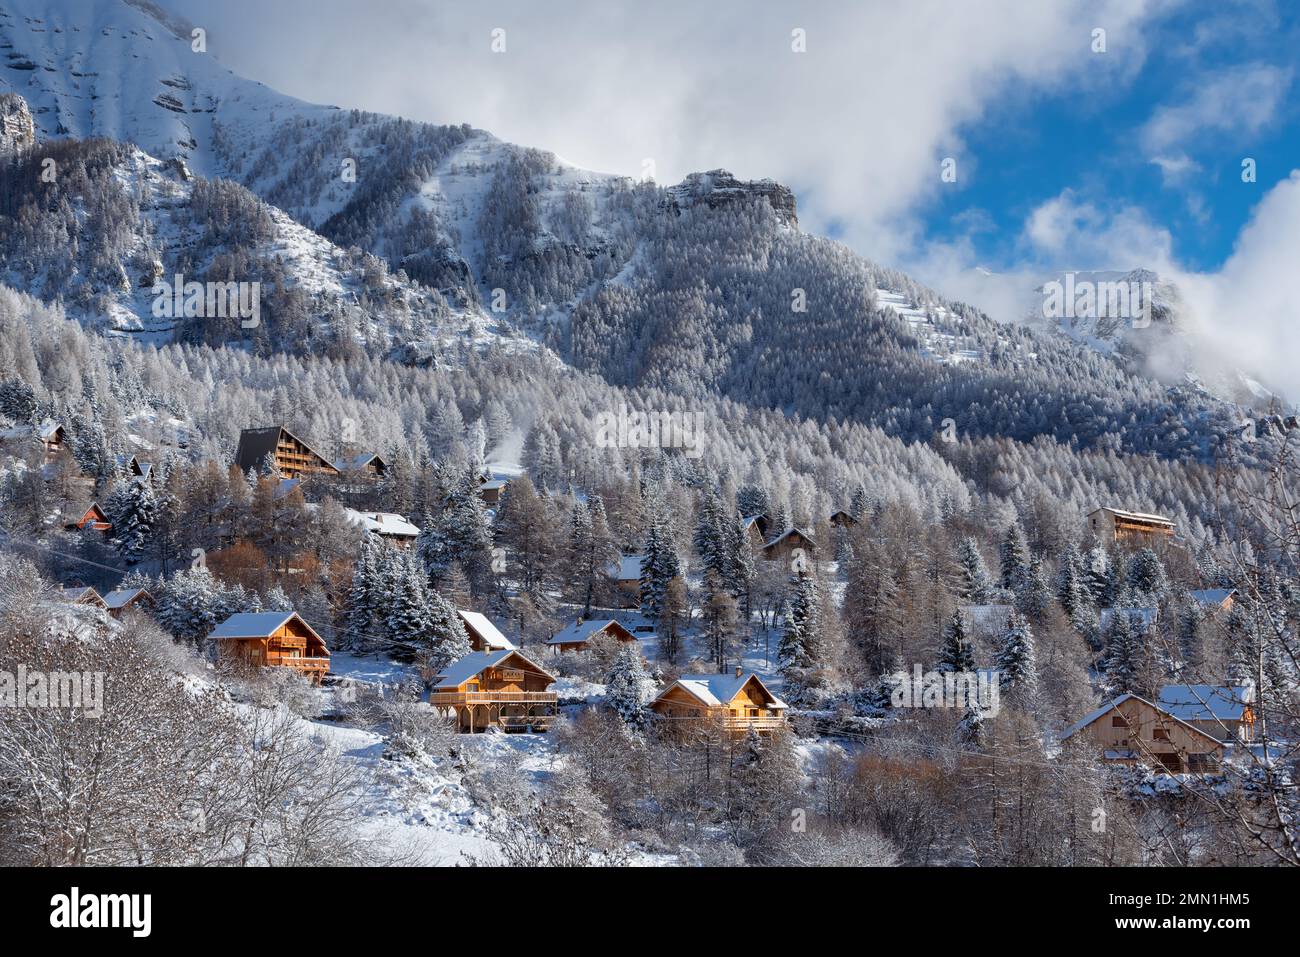 Chaillol ski resort in Ecrins National Park (Champsaur region) with snow covered slopes and wooden chalets. Hautes-Alpes (Alps), France Stock Photo